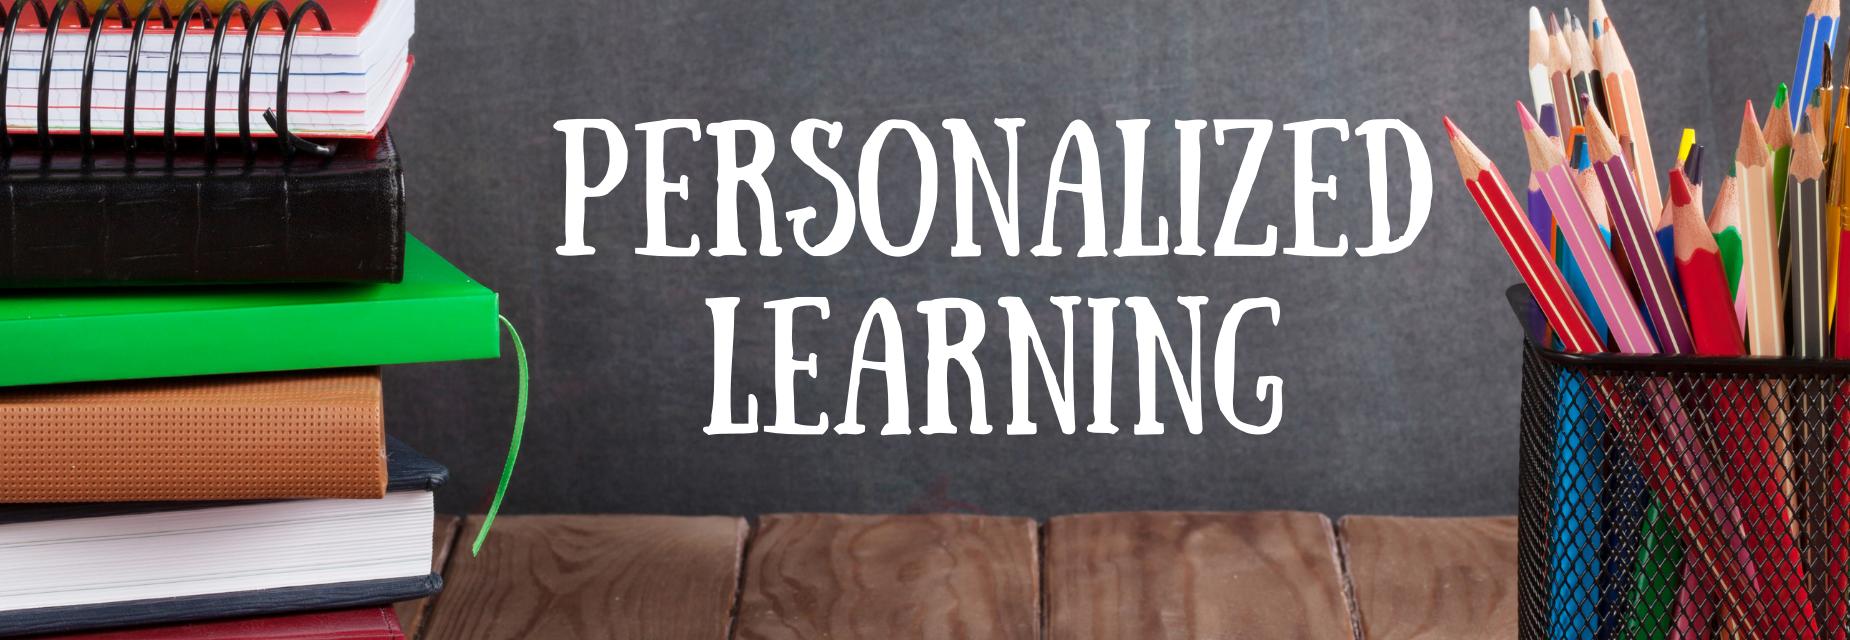 Personalized Learning banner